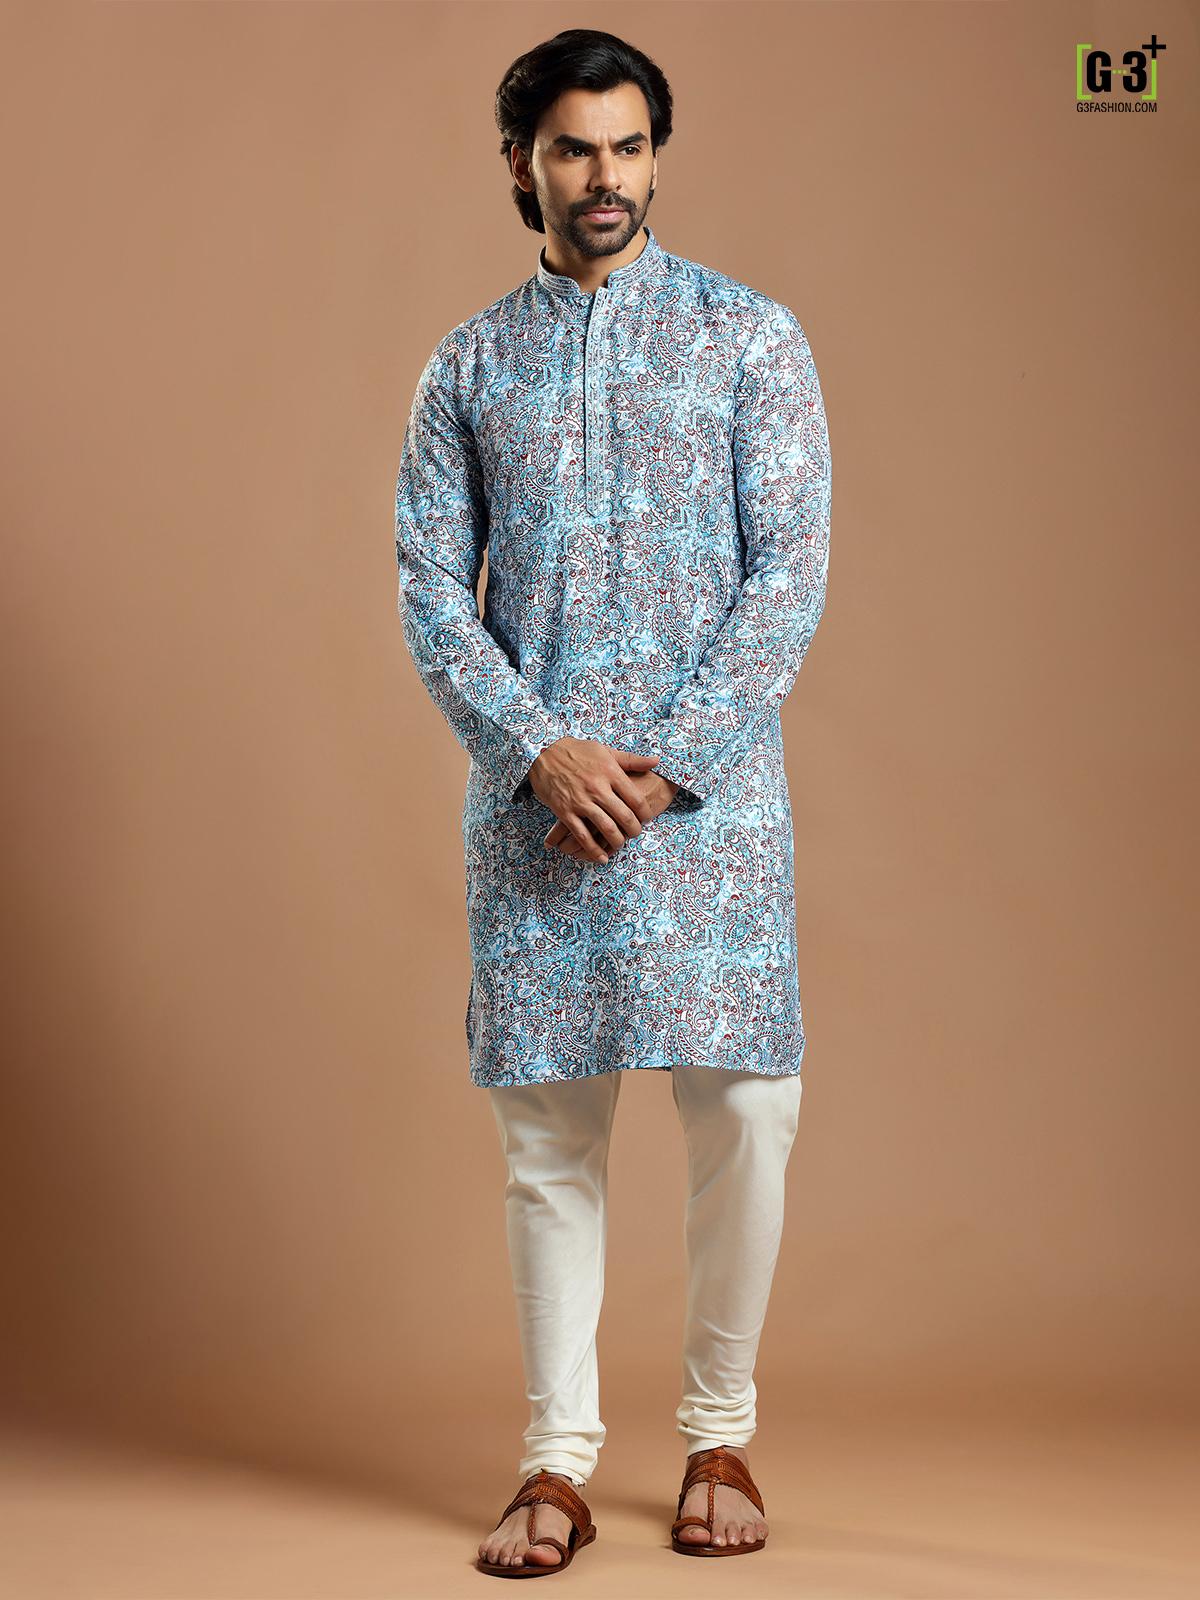 Printed pathani eid outfits for men